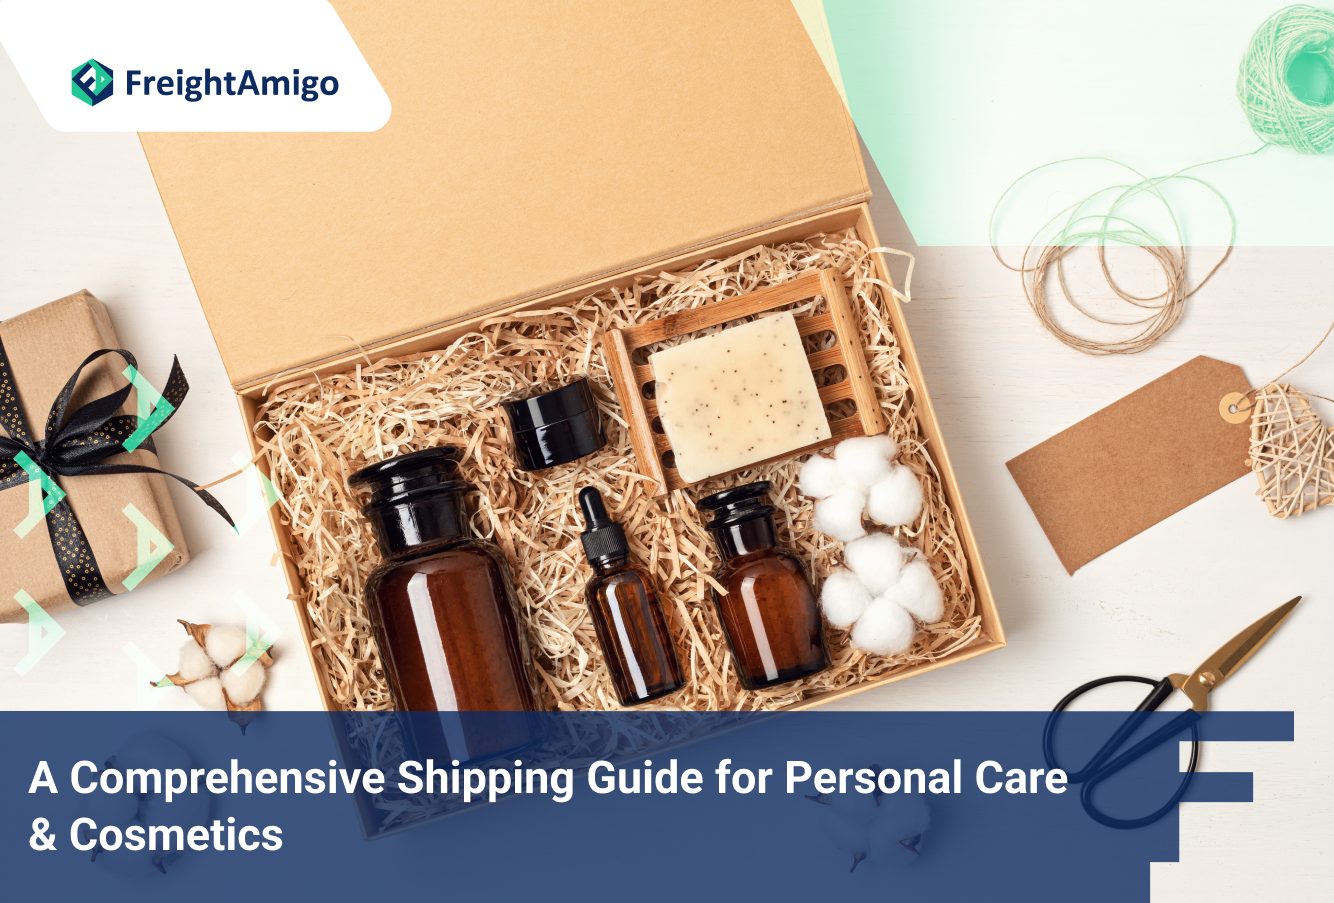 A Comprehensive Shipping Guide for Personal Care & Cosmetics